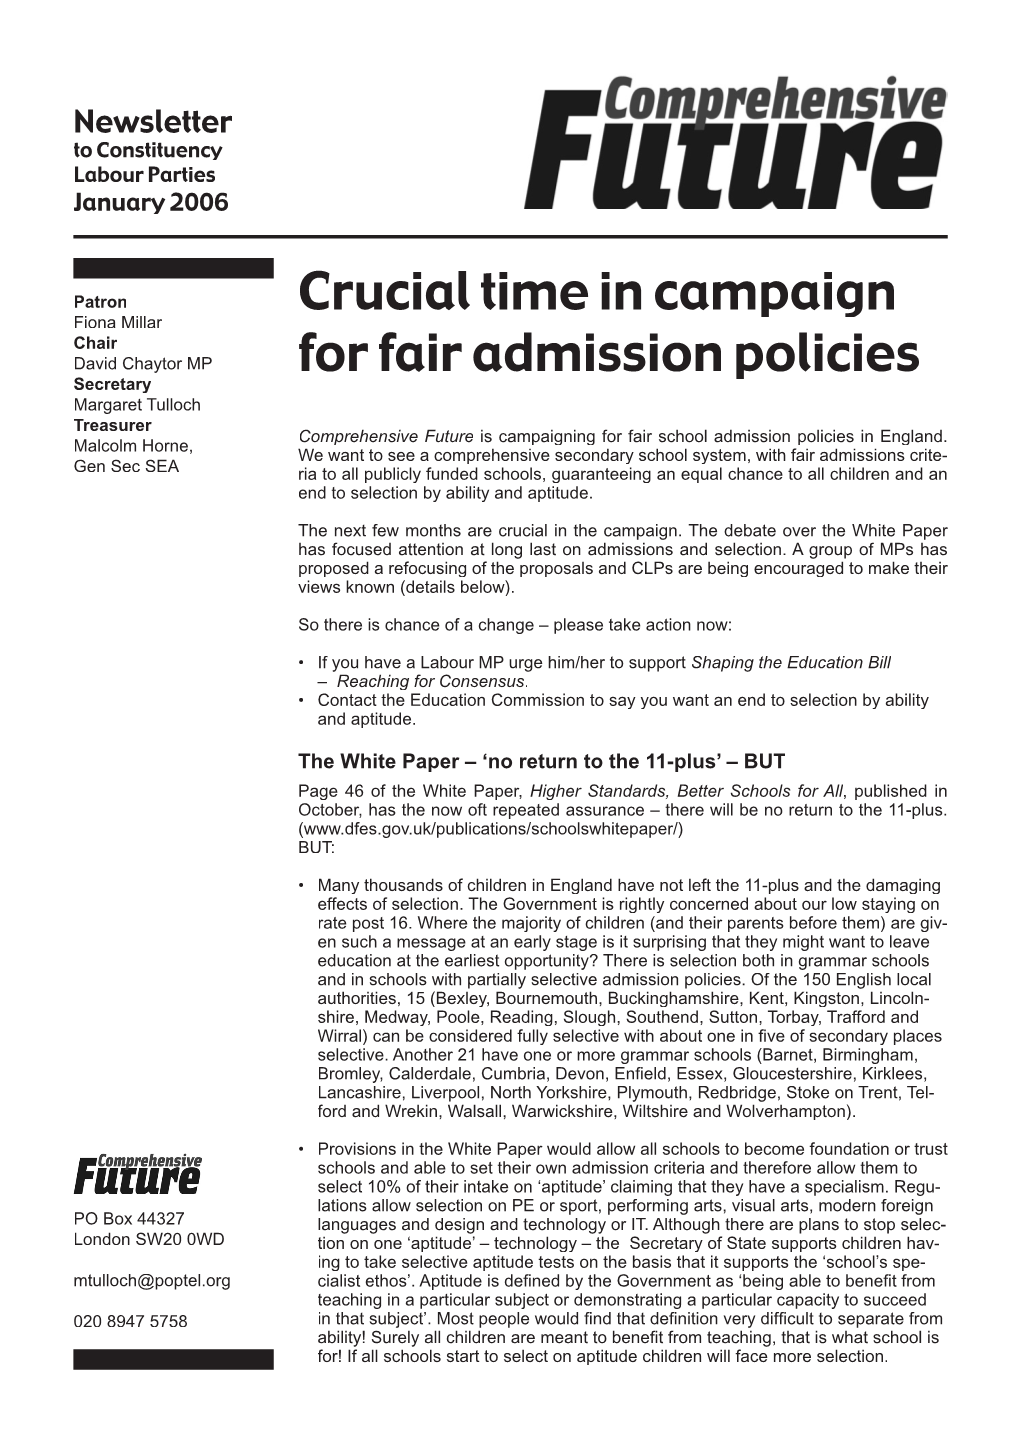 Crucial Time in Campaign for Fair Admission Policies